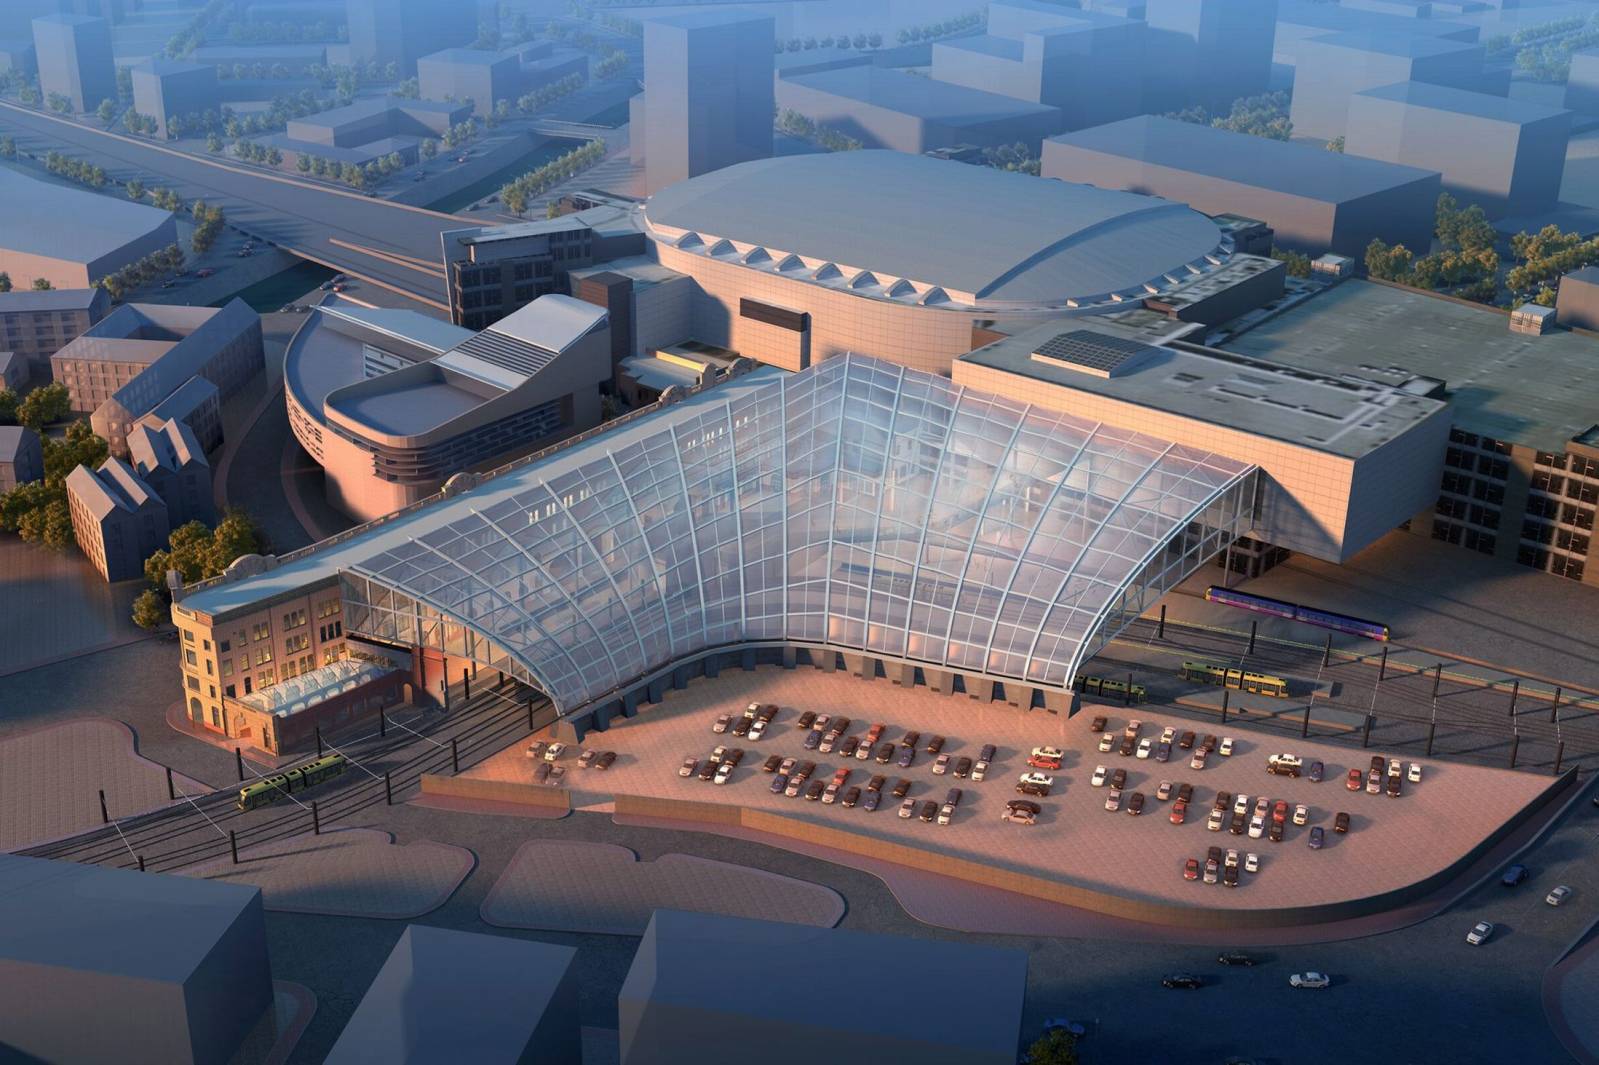 architecture now and The Future: TRANSFORMING MANCHESTER VICTORIA STATION